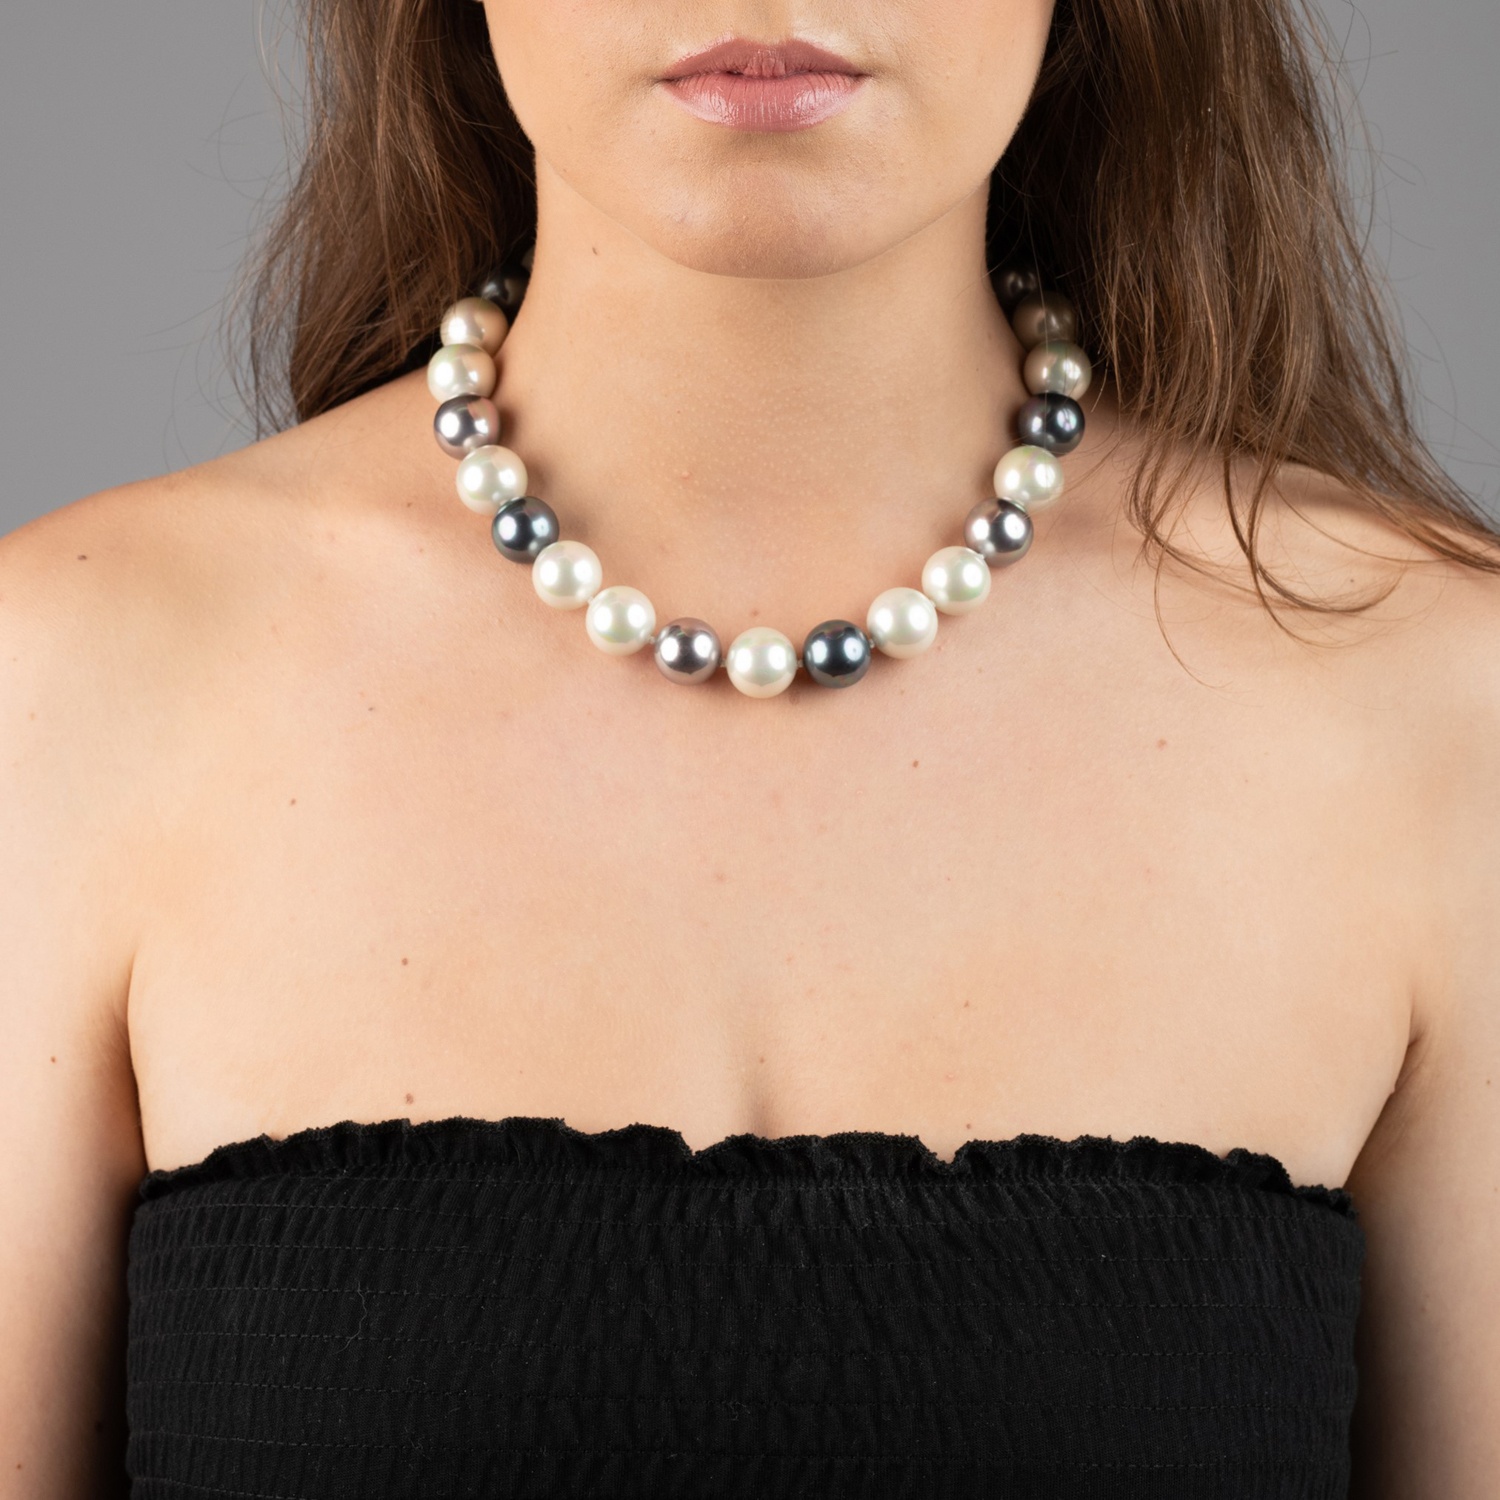 Classic white, grey and black Pearl Necklace. 2